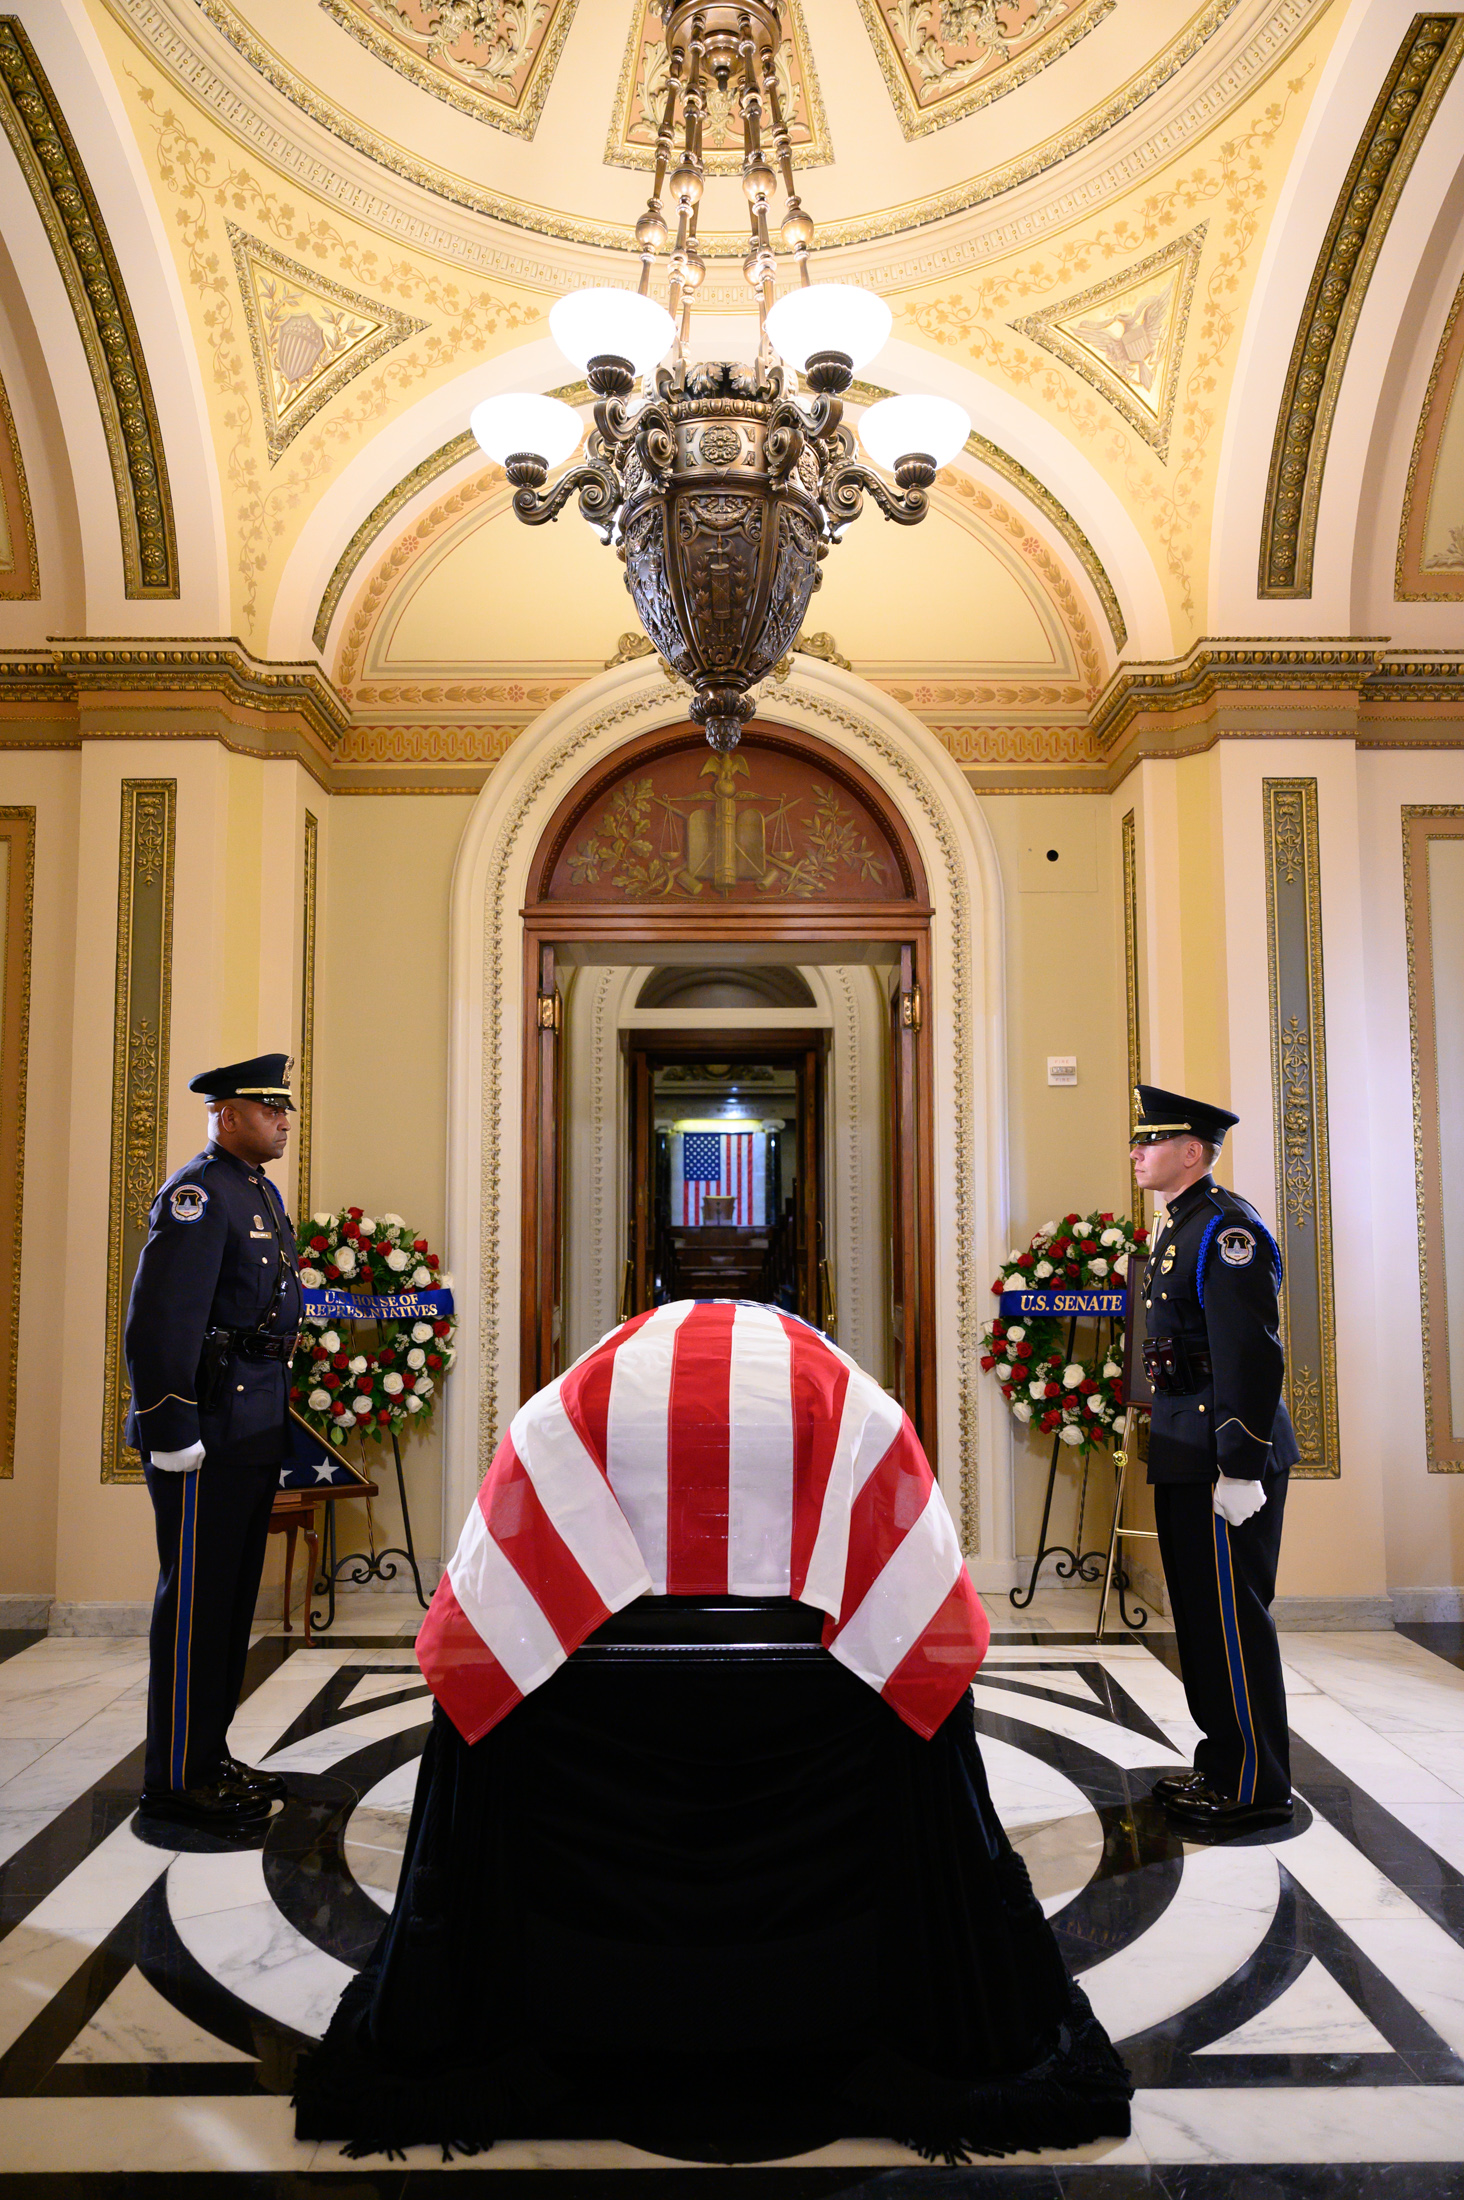 Rep. Cumming’s casket was placed on the same catafalque that held President Abraham Lincoln’s casket